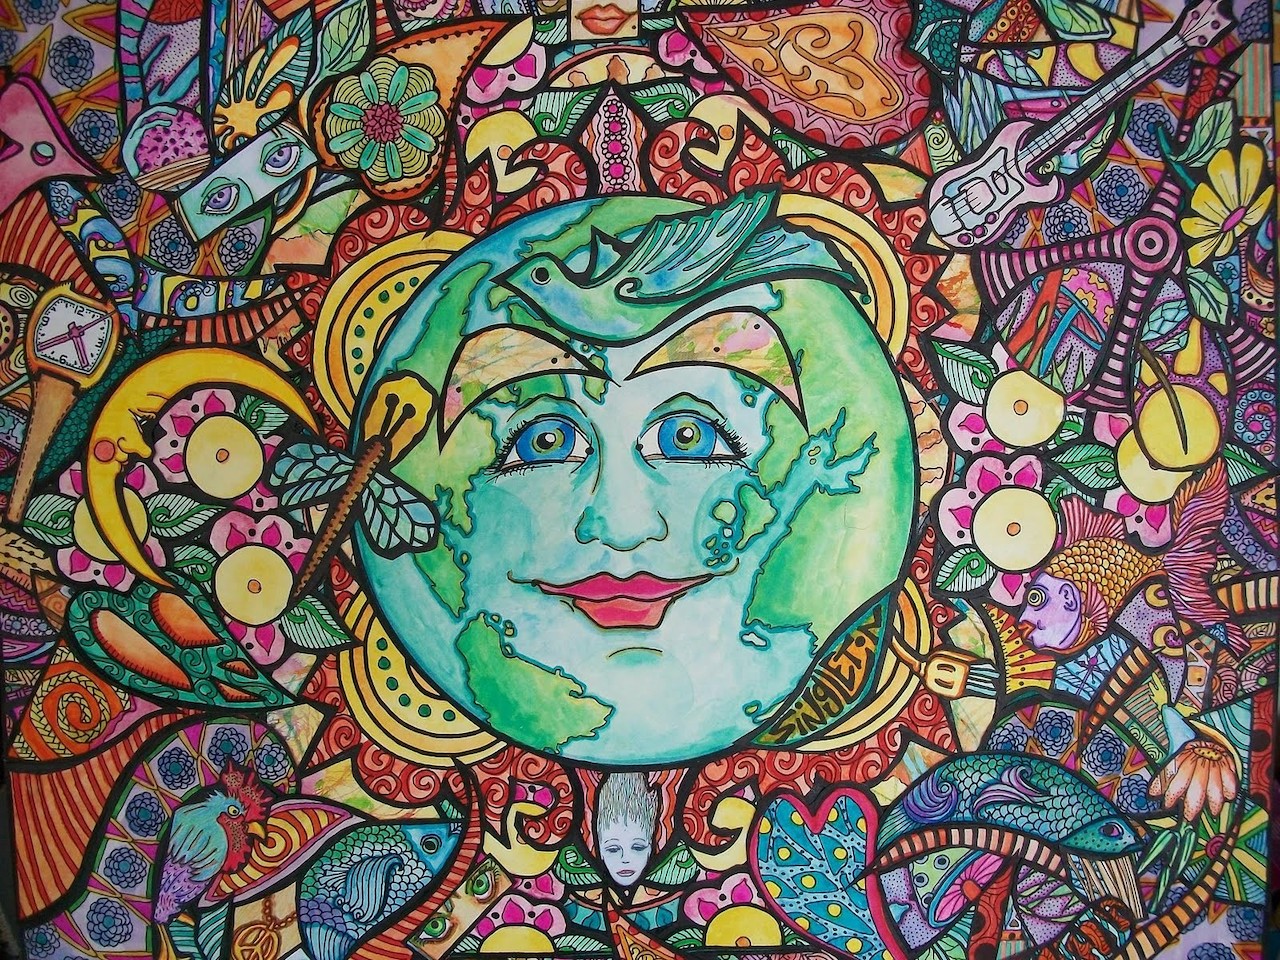 walkswith - old hippie art and doodles - jigsaw puzzle album. 